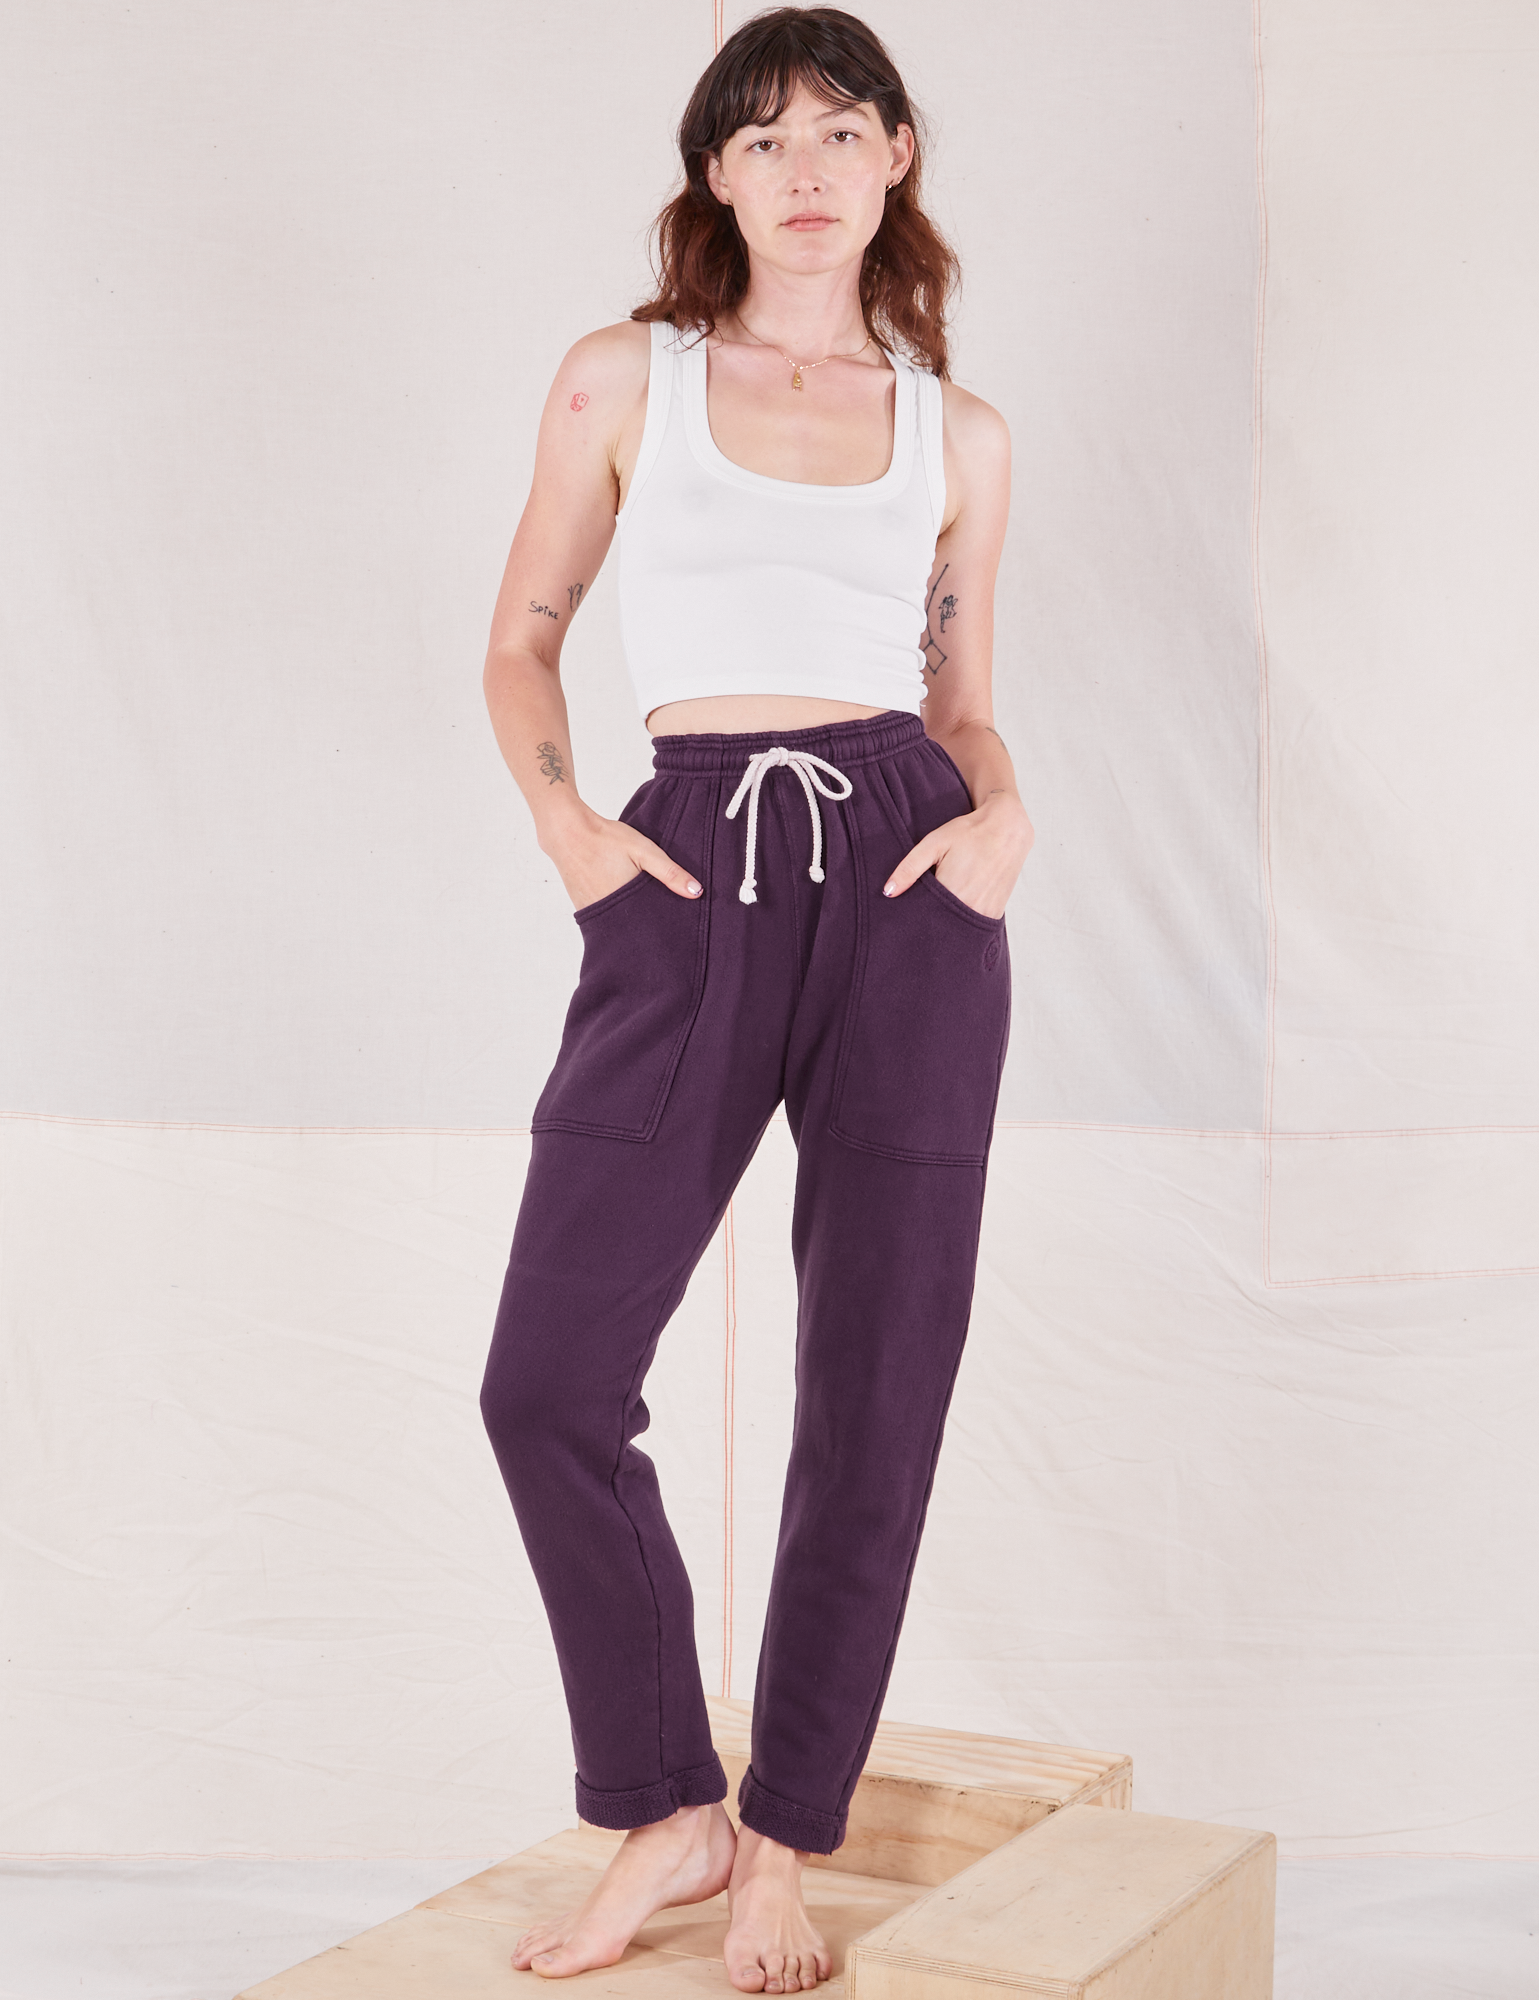 Alex is 5&#39;8&quot; and wearing P Rolled Cuff Sweat Pants in Nebula Purple paired with Cropped Tank in vintage tee off-white